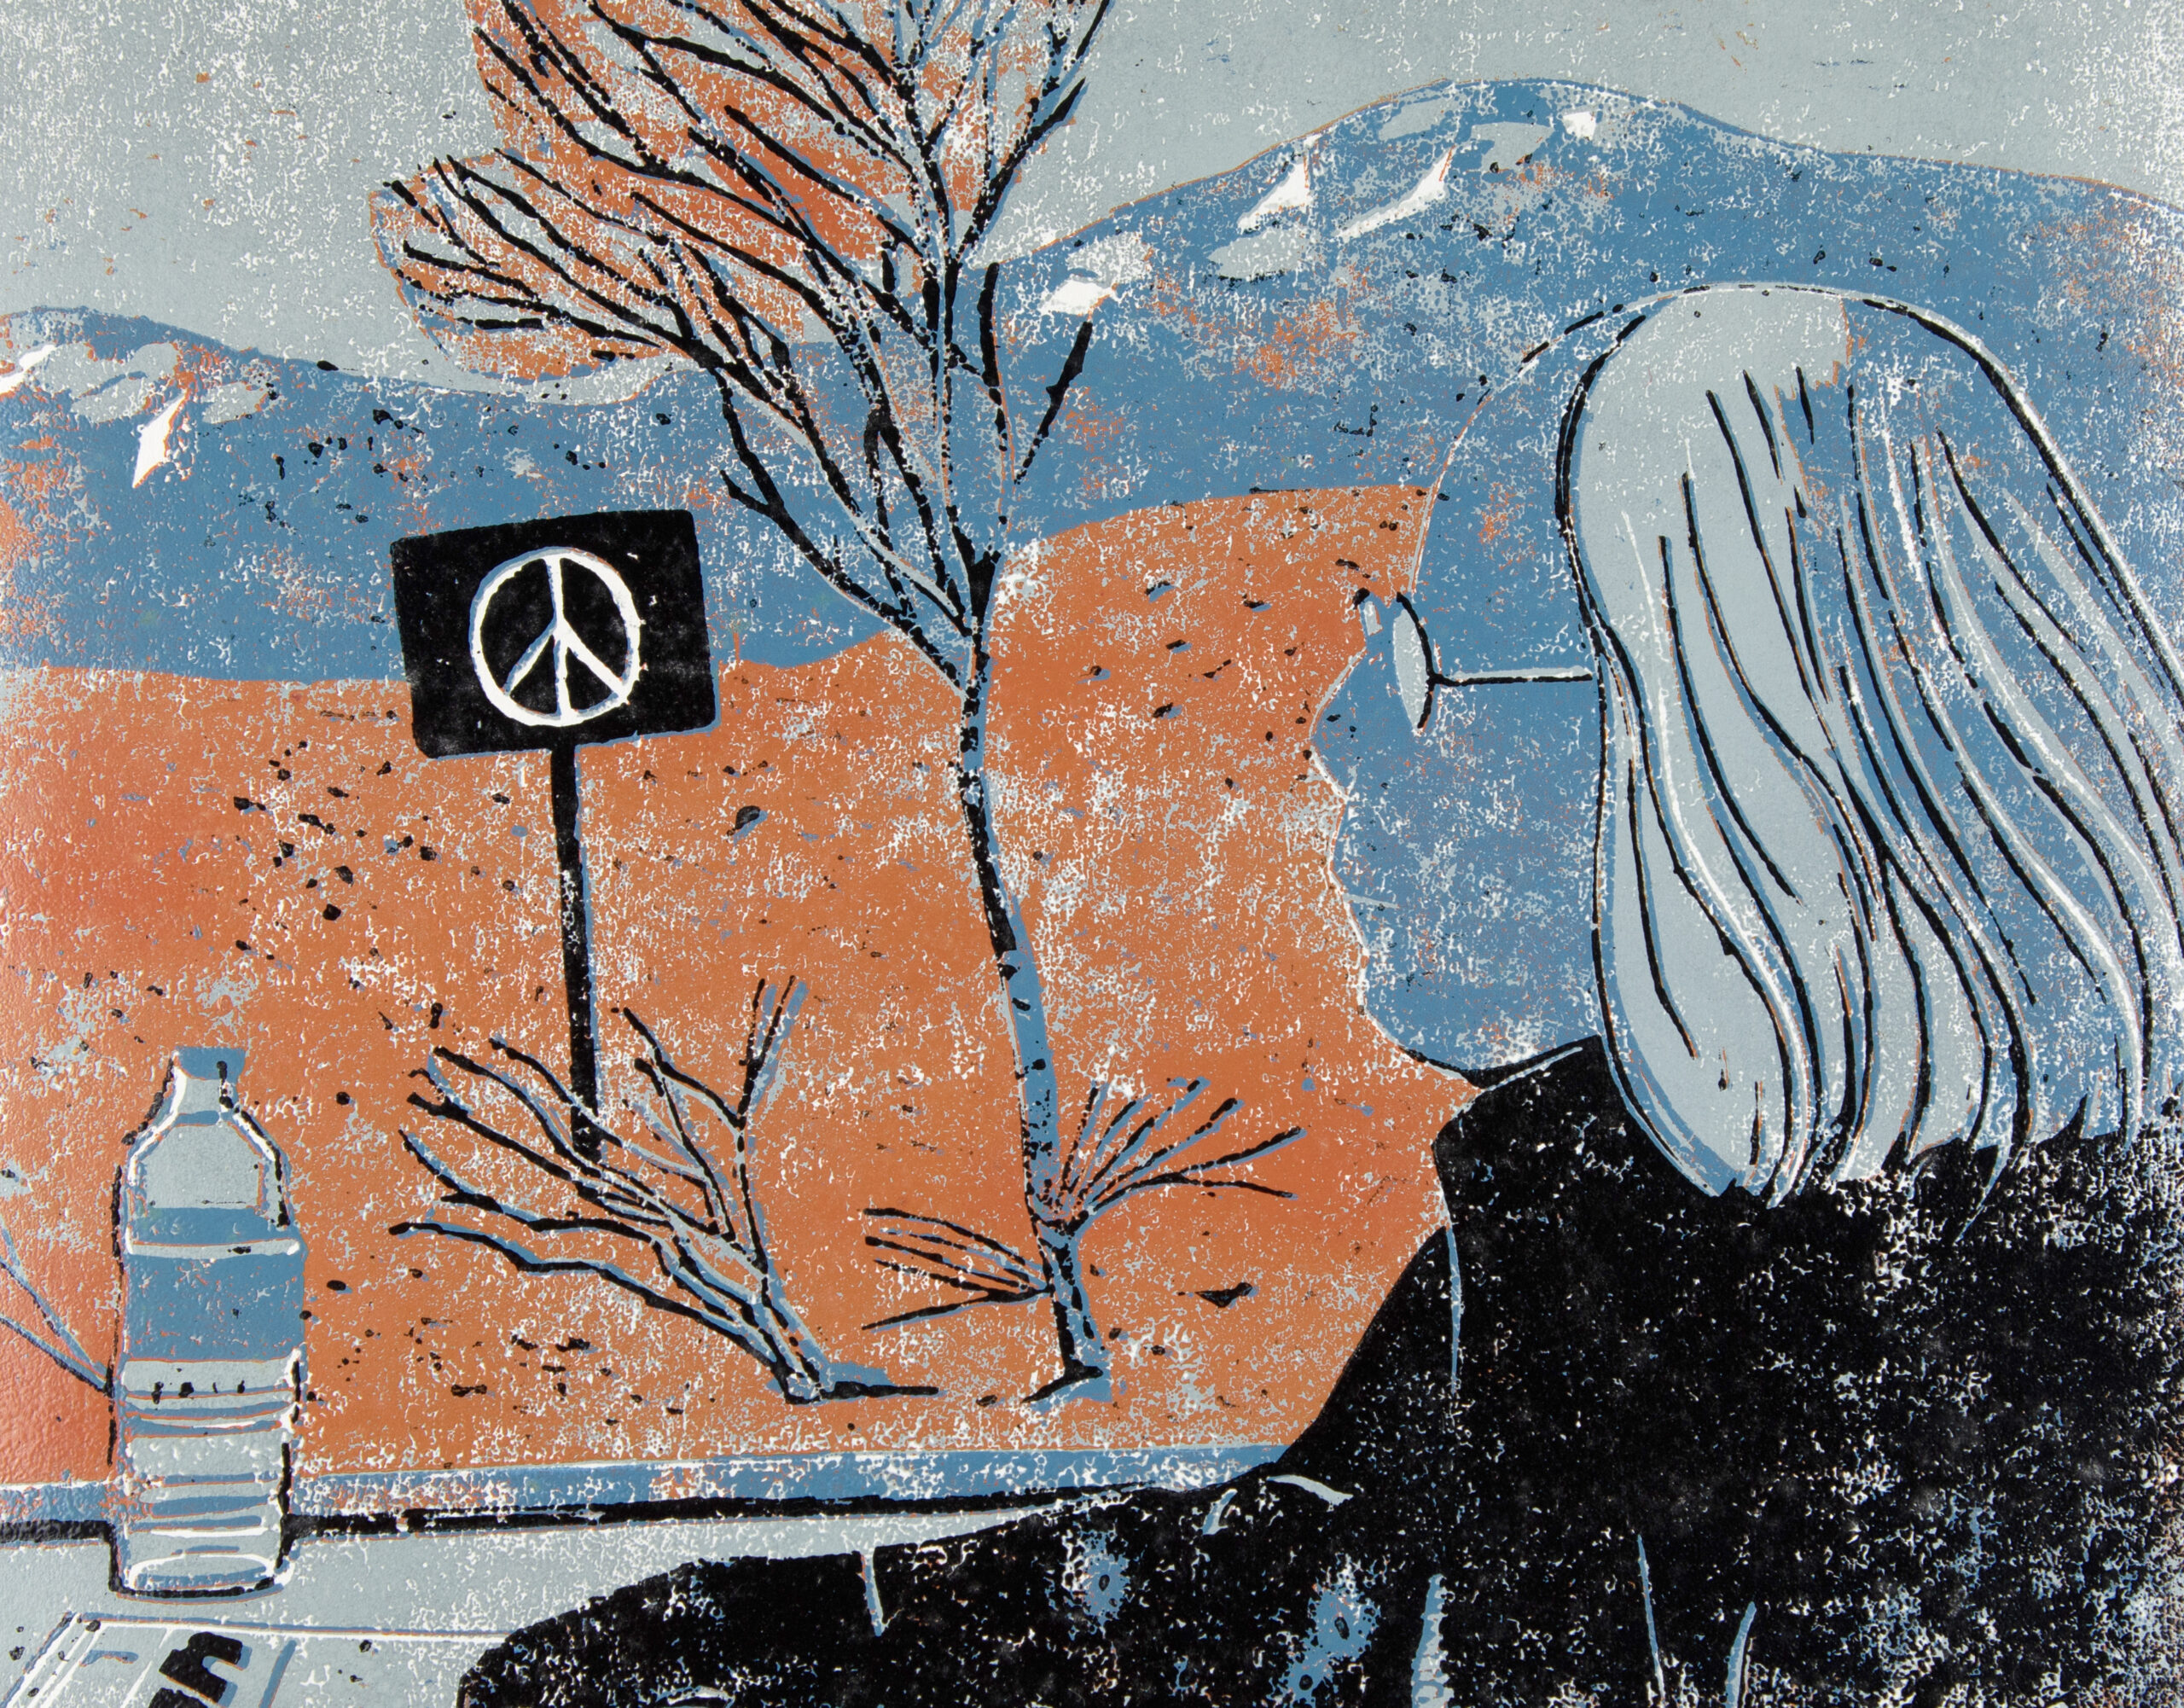 A print in blue and orange colours of a person sitting at a train window, you can see their face in profile. They have a bottle of water in front of them and out of the window behind them are trees and mountains and jsut behind the tree is a peace sign on a placard.